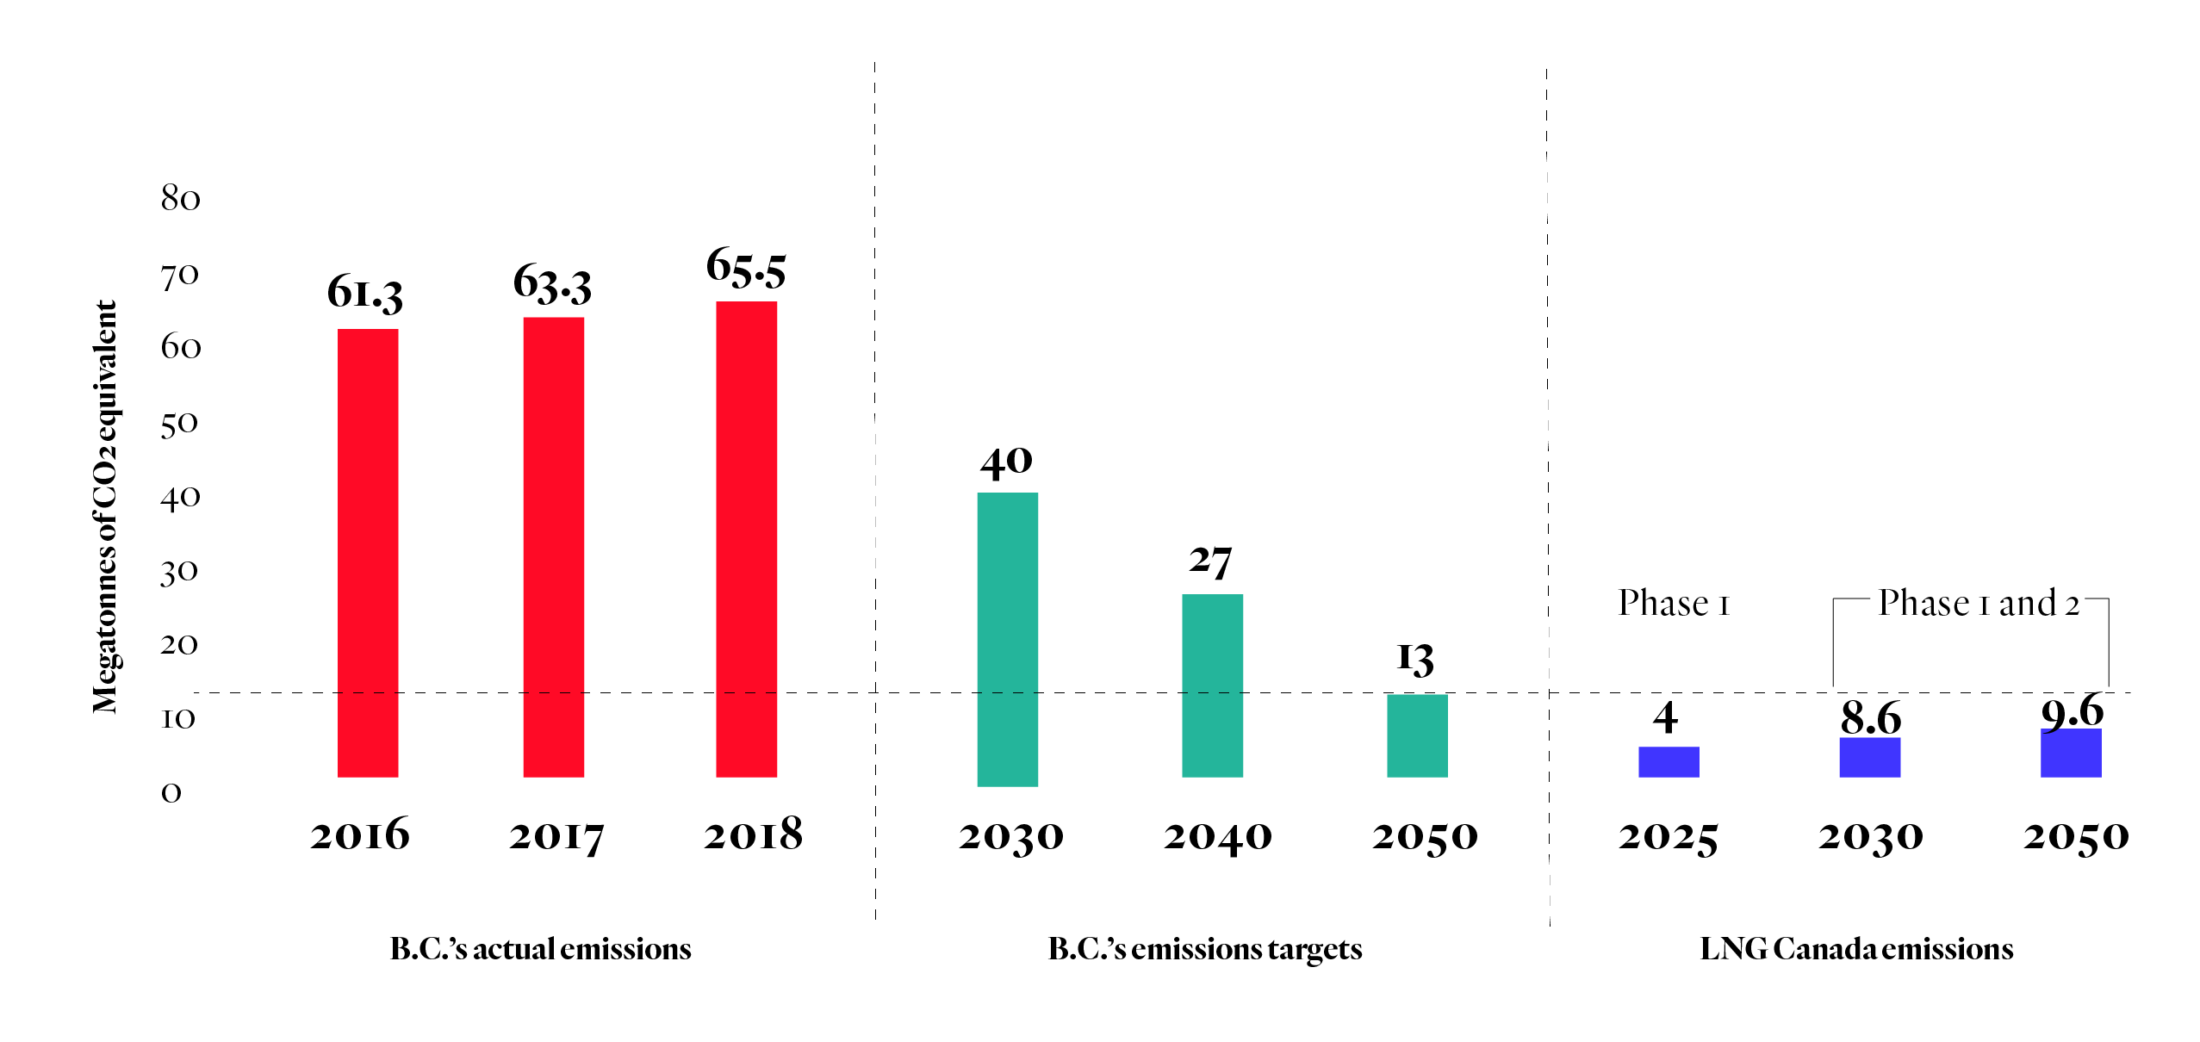 A graph of B.C.'s emissions and targets